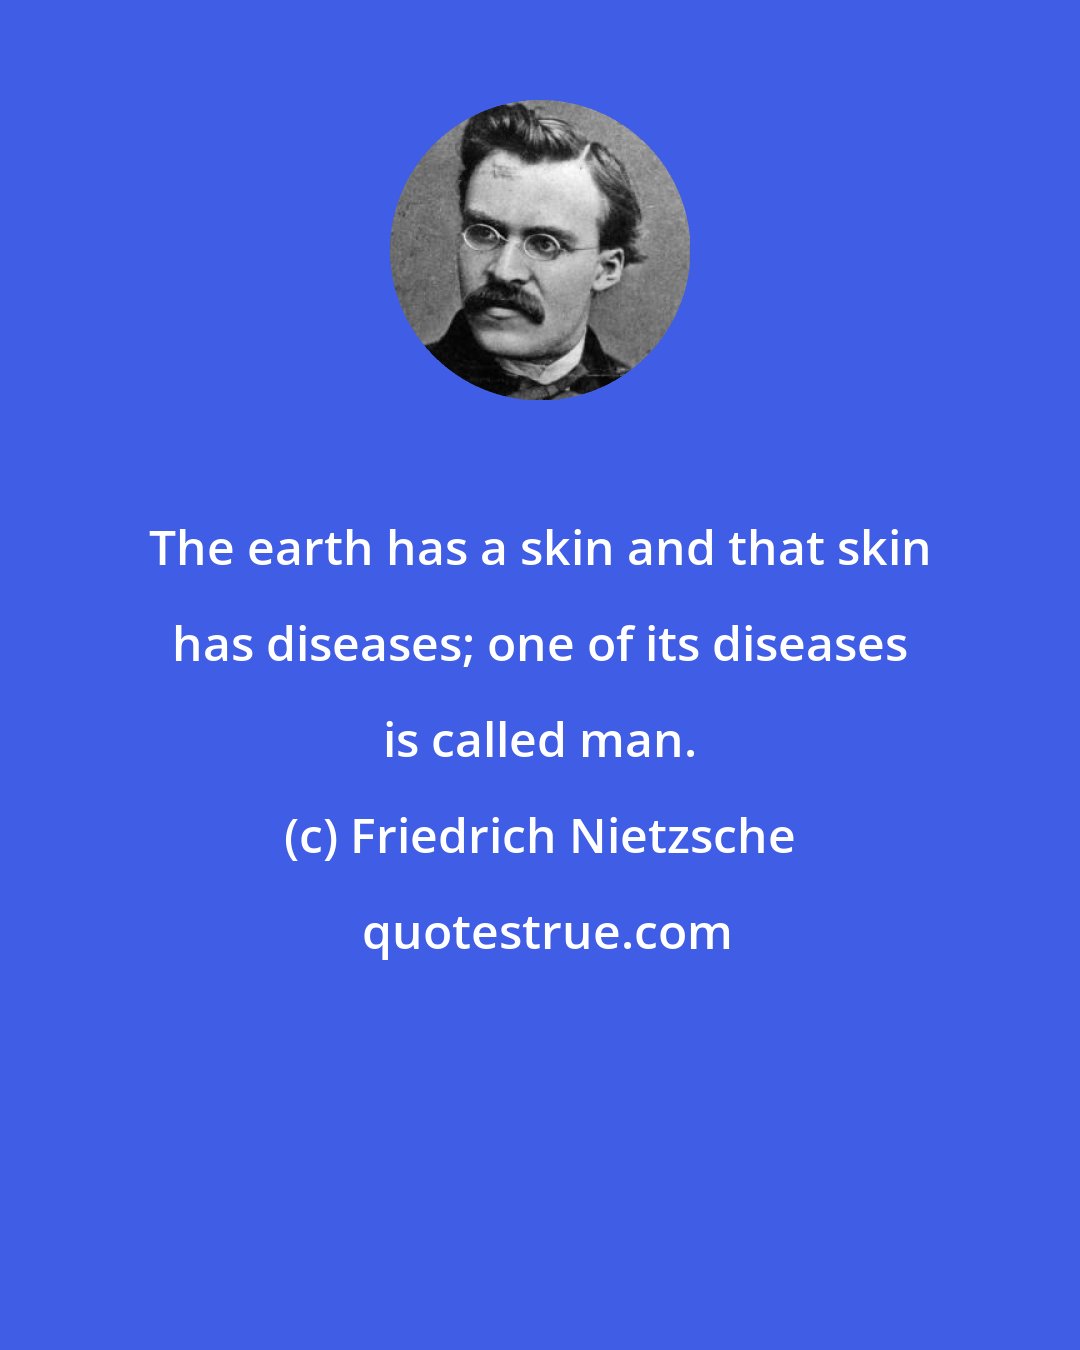 Friedrich Nietzsche: The earth has a skin and that skin has diseases; one of its diseases is called man.